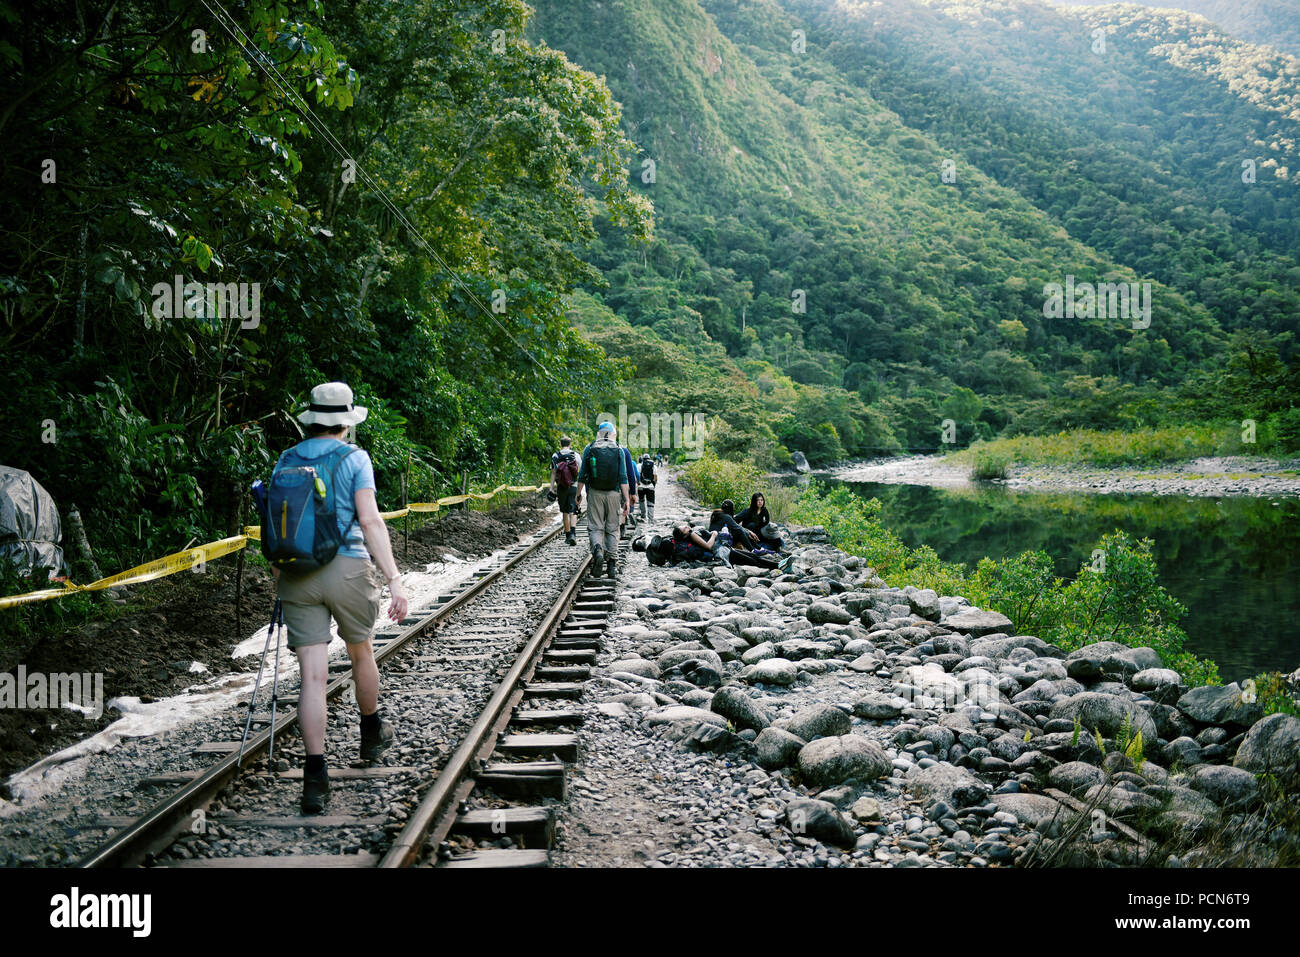 Tourists walking along the railway tracks from Hidroelectrica to Aguas Calientes, Peru. The 2.5 hrs walk (12km) is full of amazing scenery. Jun 2018 Stock Photo